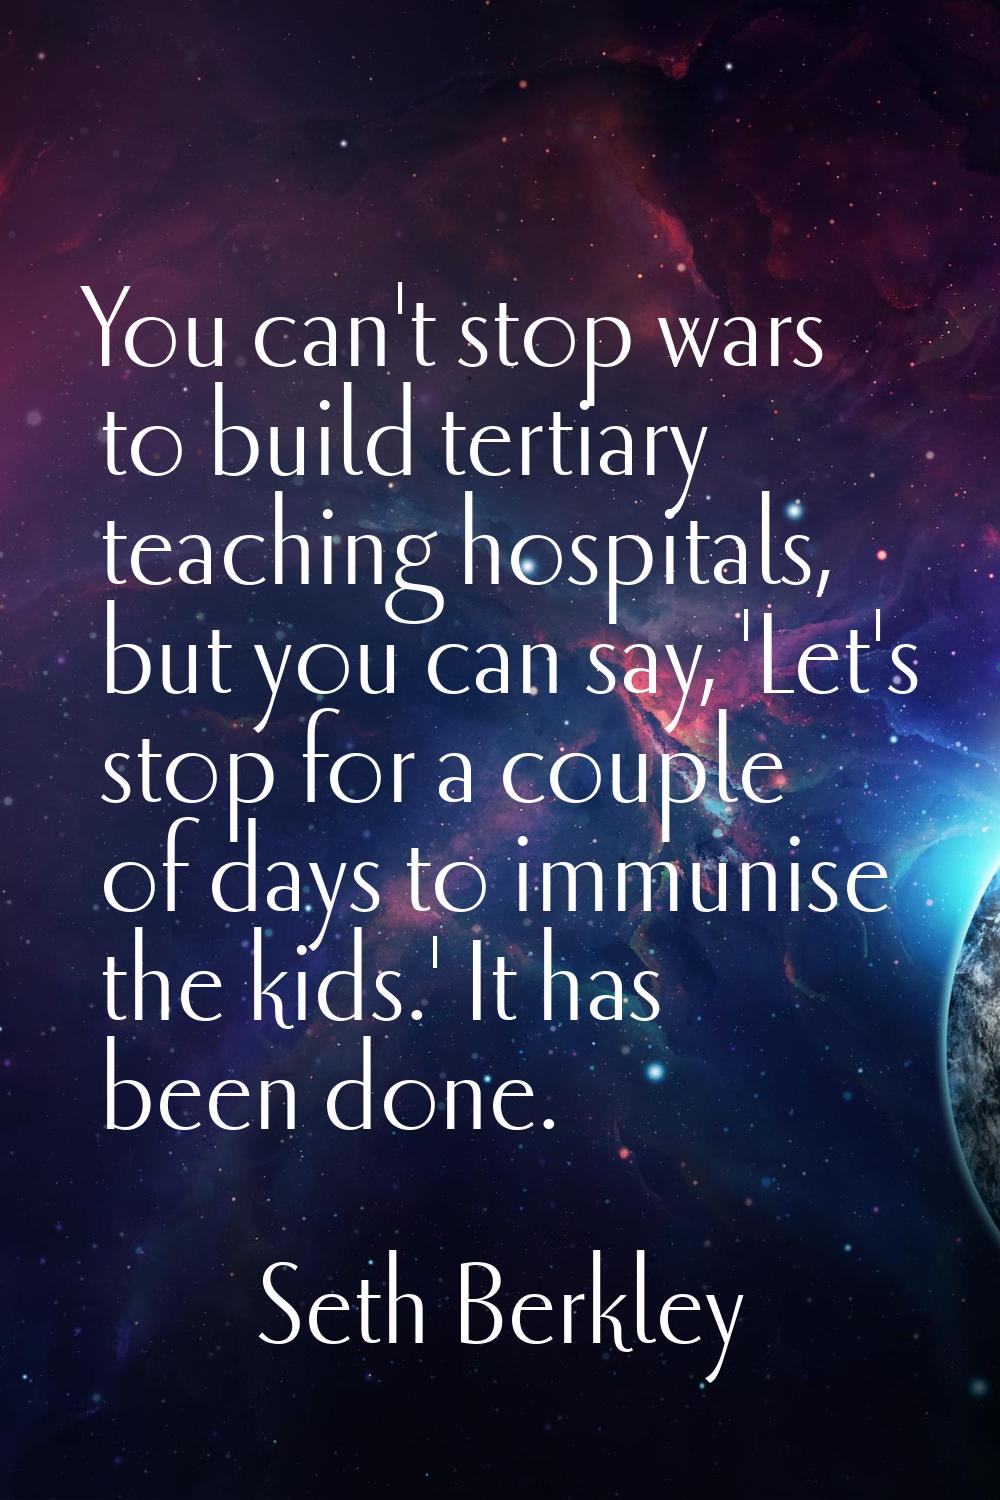 You can't stop wars to build tertiary teaching hospitals, but you can say, 'Let's stop for a couple